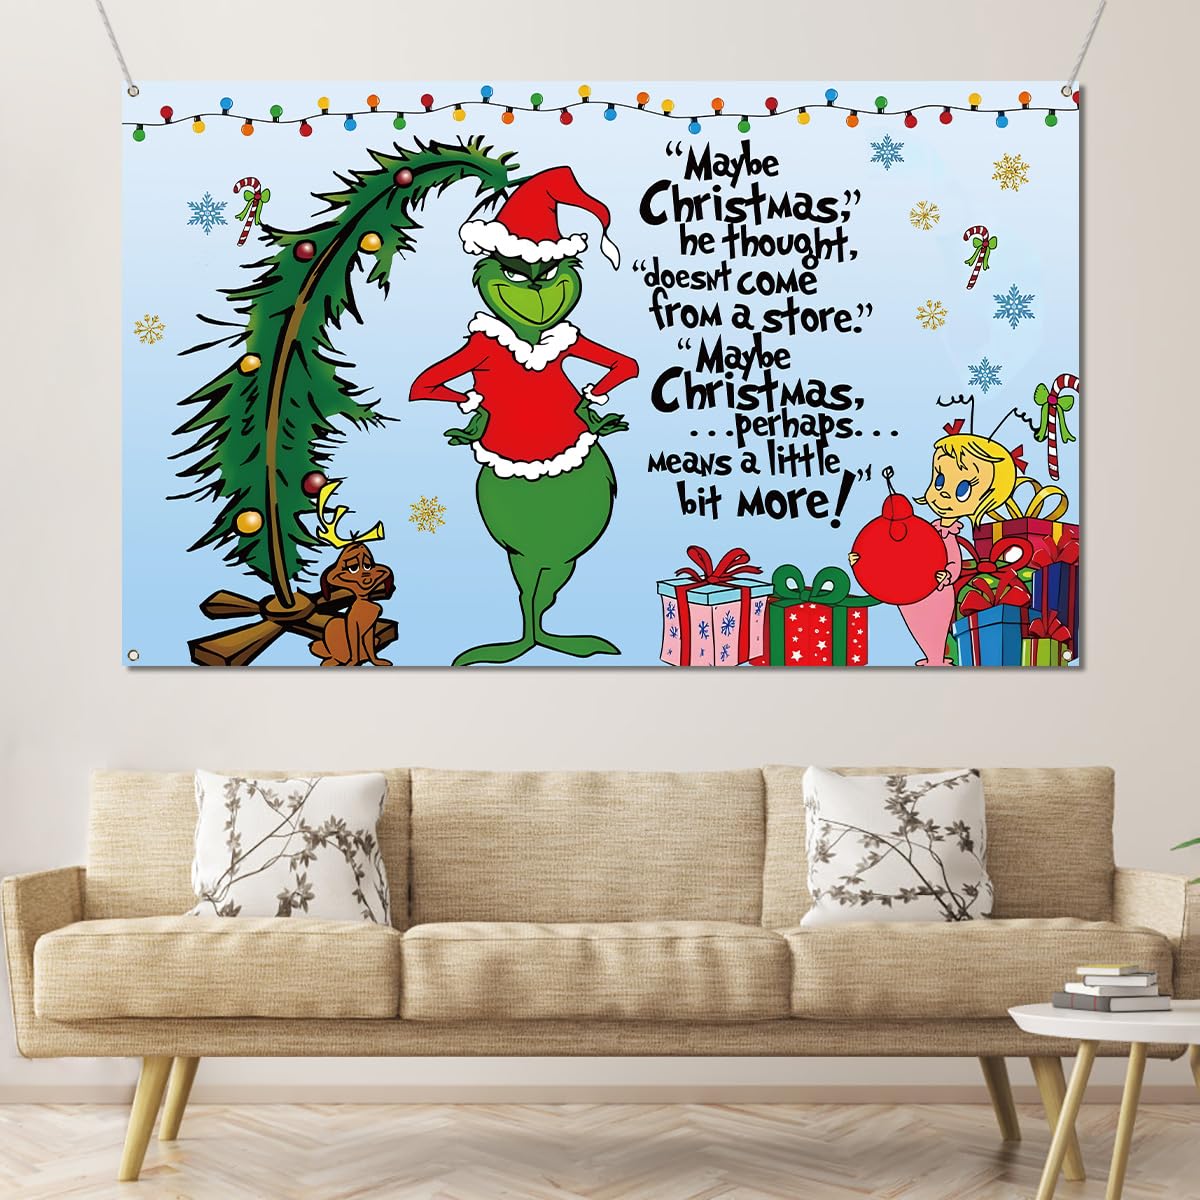 Sunwer Merry Grinchmas Photo Booth Backdrop Christmas Green Elf Winter Holiday Party Decor Xmas Indoor Outdoor Wall Hanging Background Decoration Supply (5.9×3.6ft)